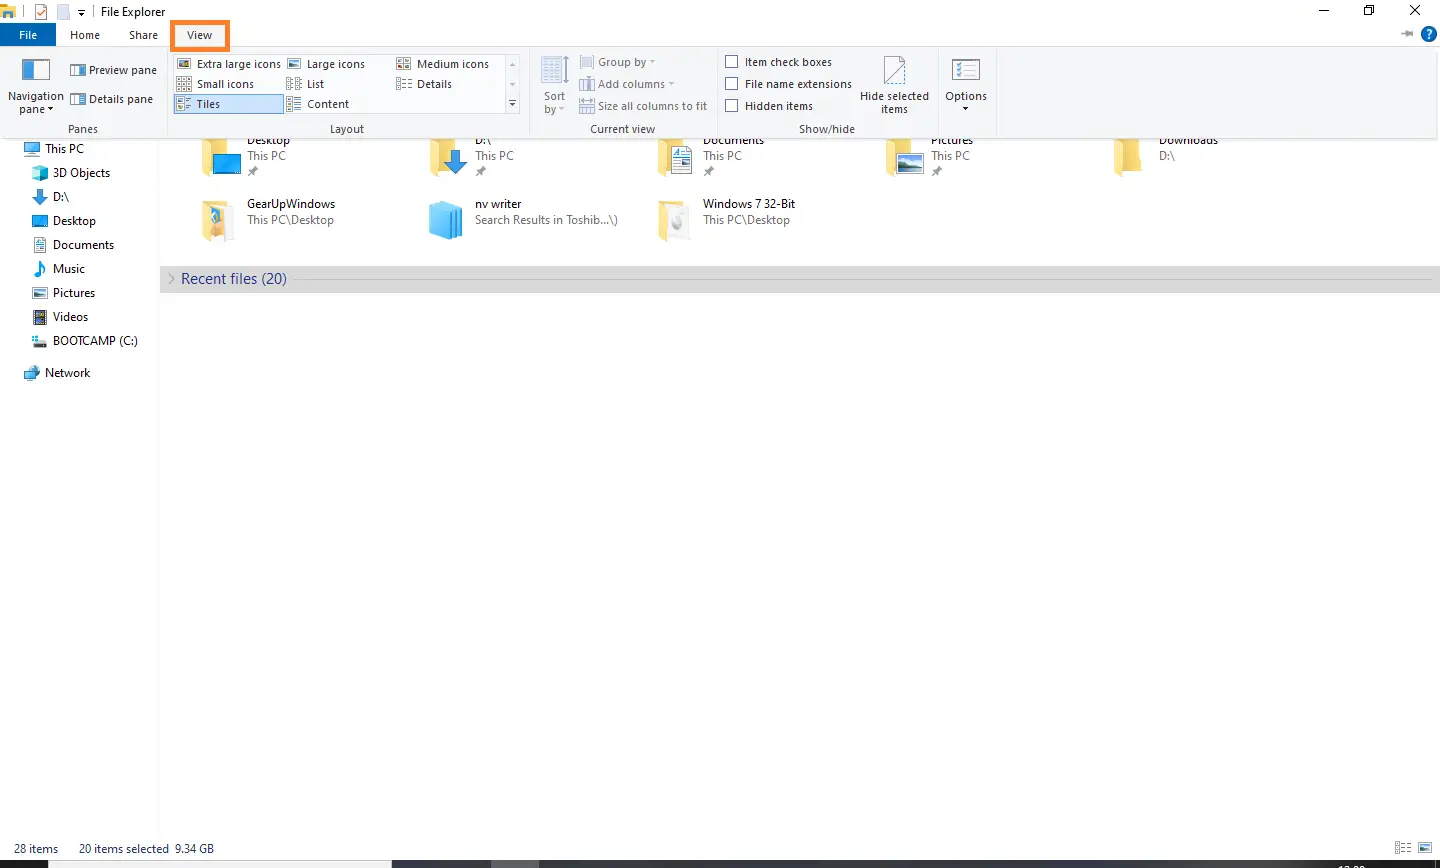 Find and delete the file named IconCache.db
Open Task Manager by pressing Ctrl+Shift+Esc